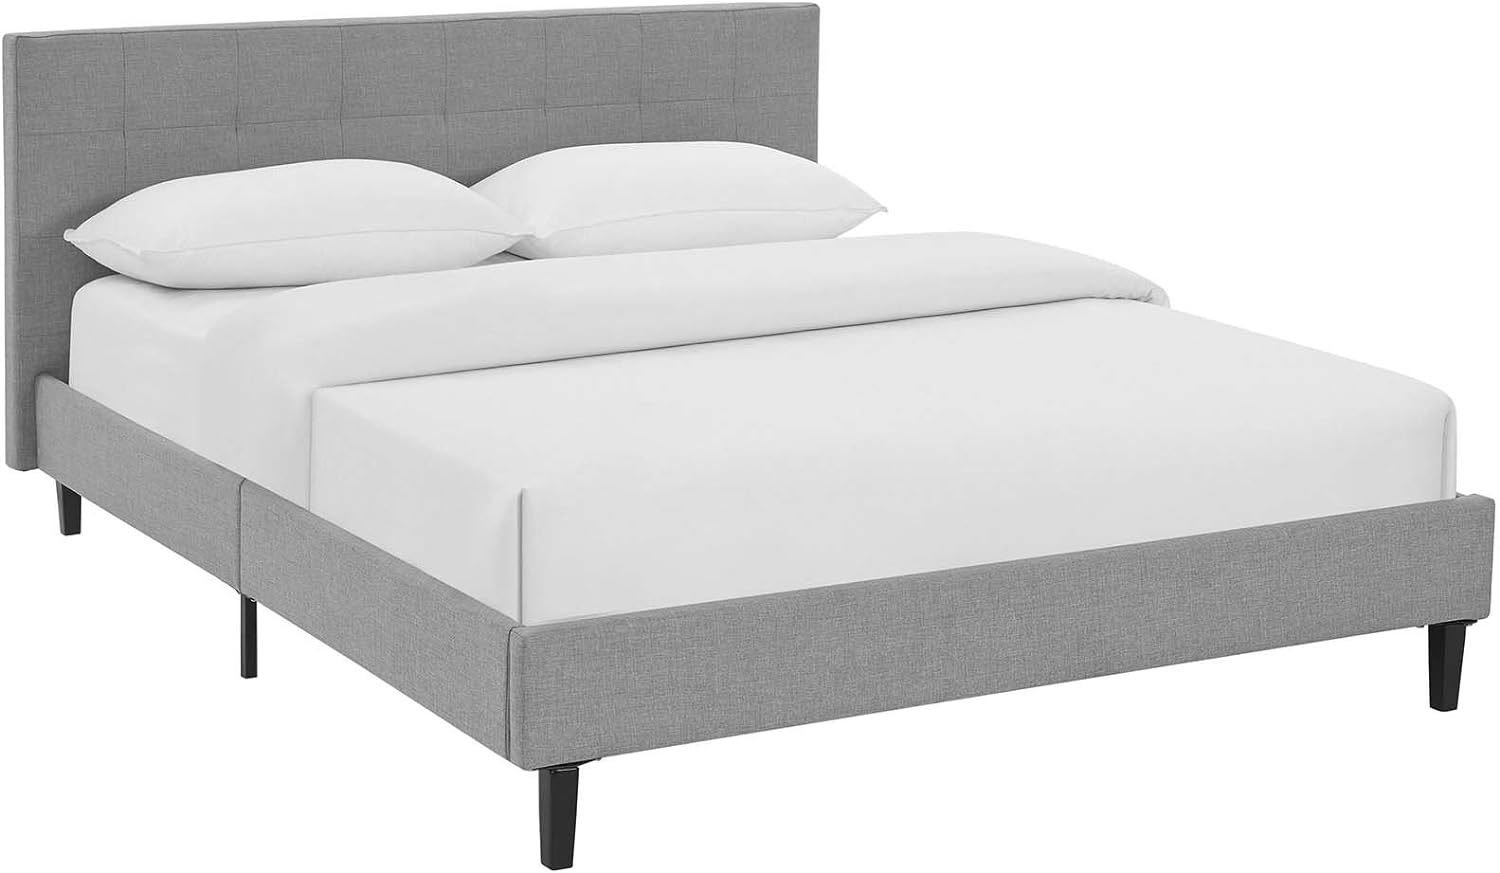 Primary image for Queen Platform Bed With Wood Slat Support And Light Gray Upholstery By Modway.